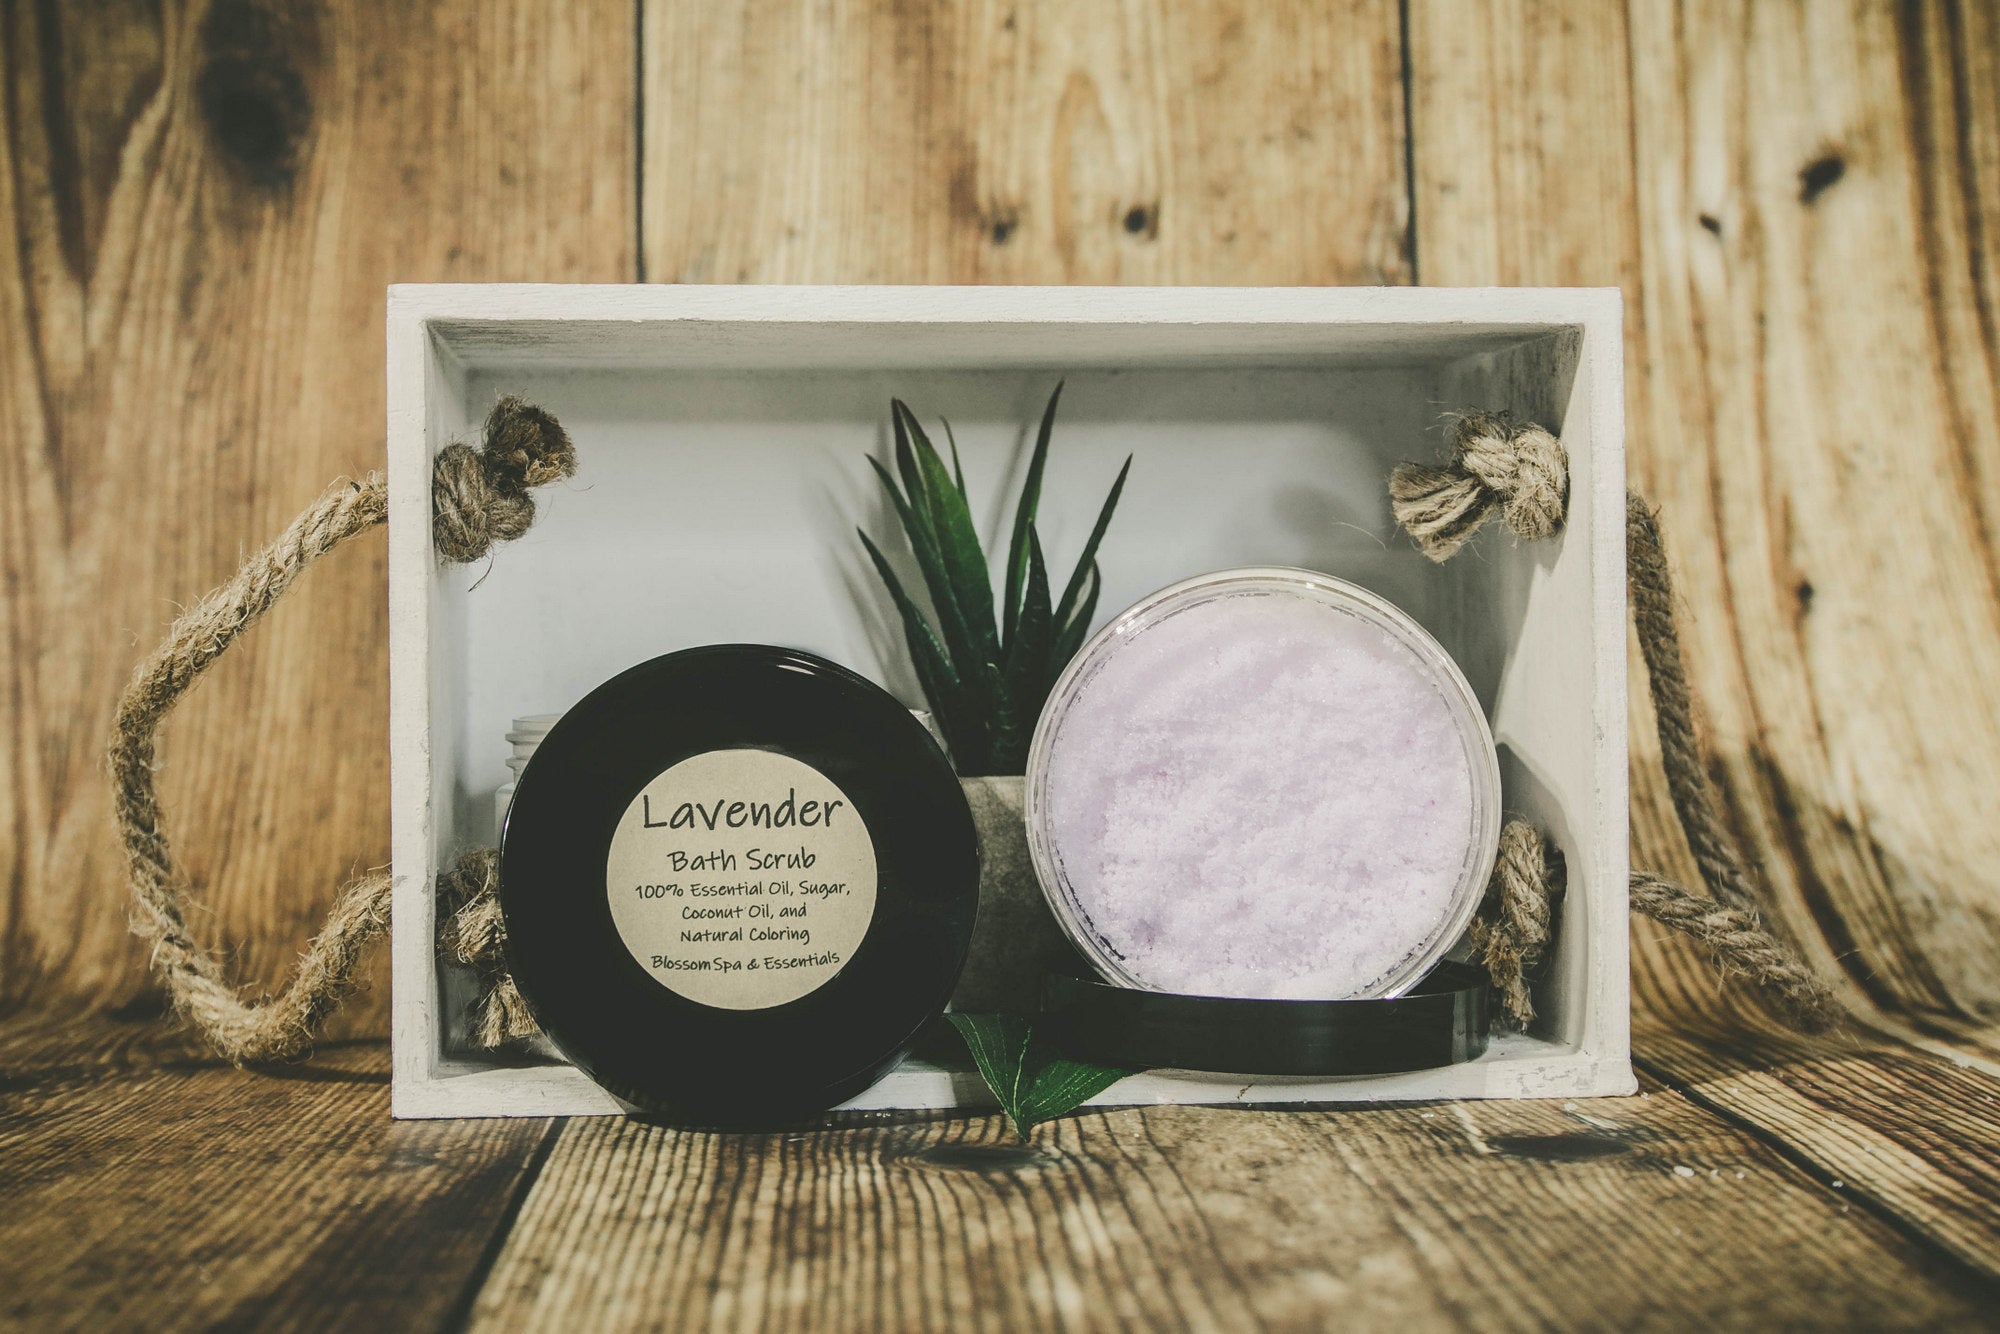 This relaxing lavender scrub exfoliates to leave your skin feeling great and smelling awesome.  These homemade bath scrubs are made with coconut oil, sugar & essential oils to moisturize your skin and leave it soft and smooth. You can use these on your hands, feet, or pretty much anywhere else. Do not eat. These are in 12oz plastic containers. homemade bath scrubs with sugar how do you make homemade bath scrubs